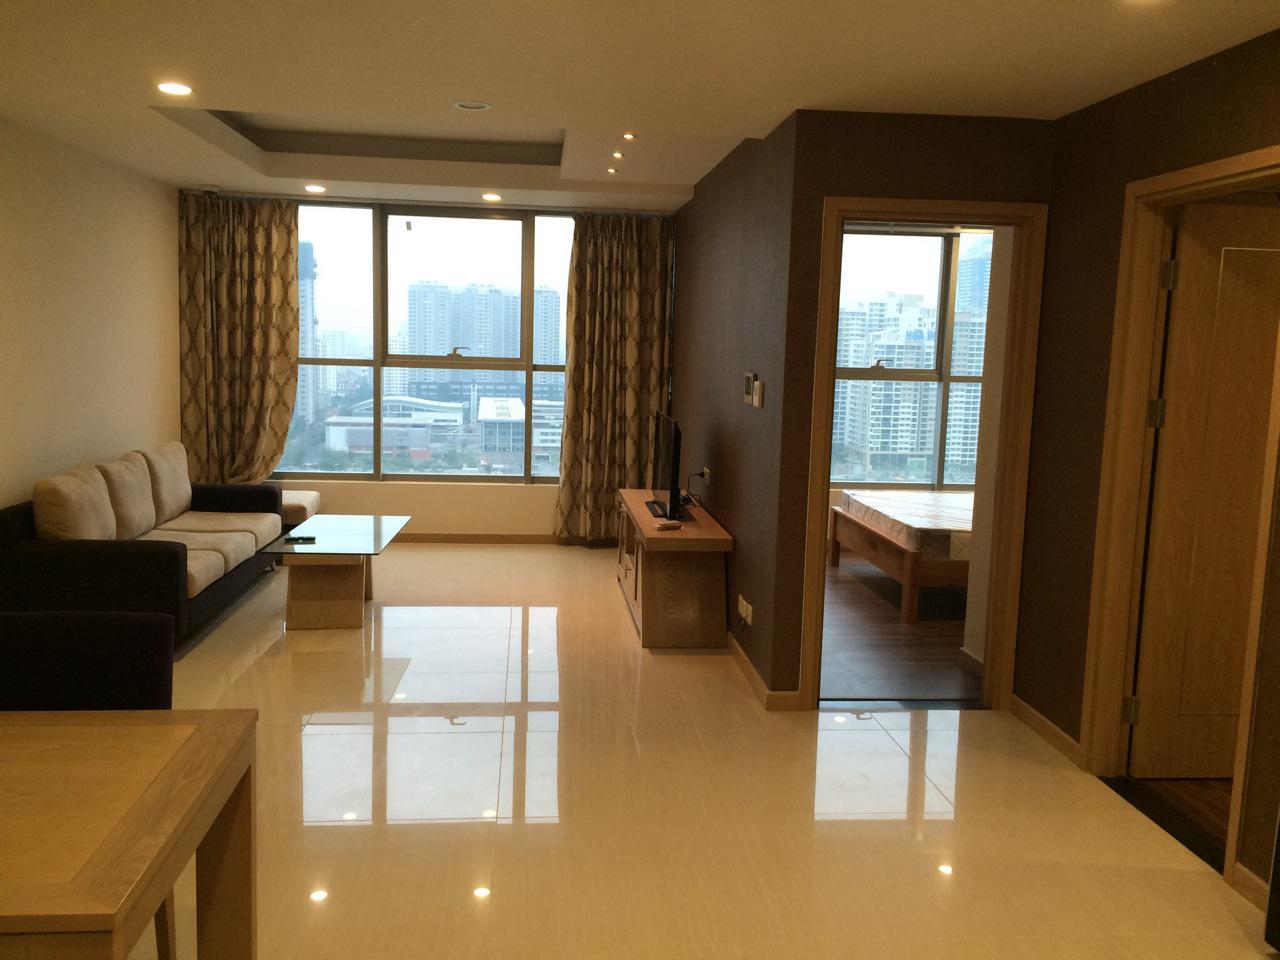 3 fully furnished bedroom Apartment for rent at Trung Hoa Nhan Chinh